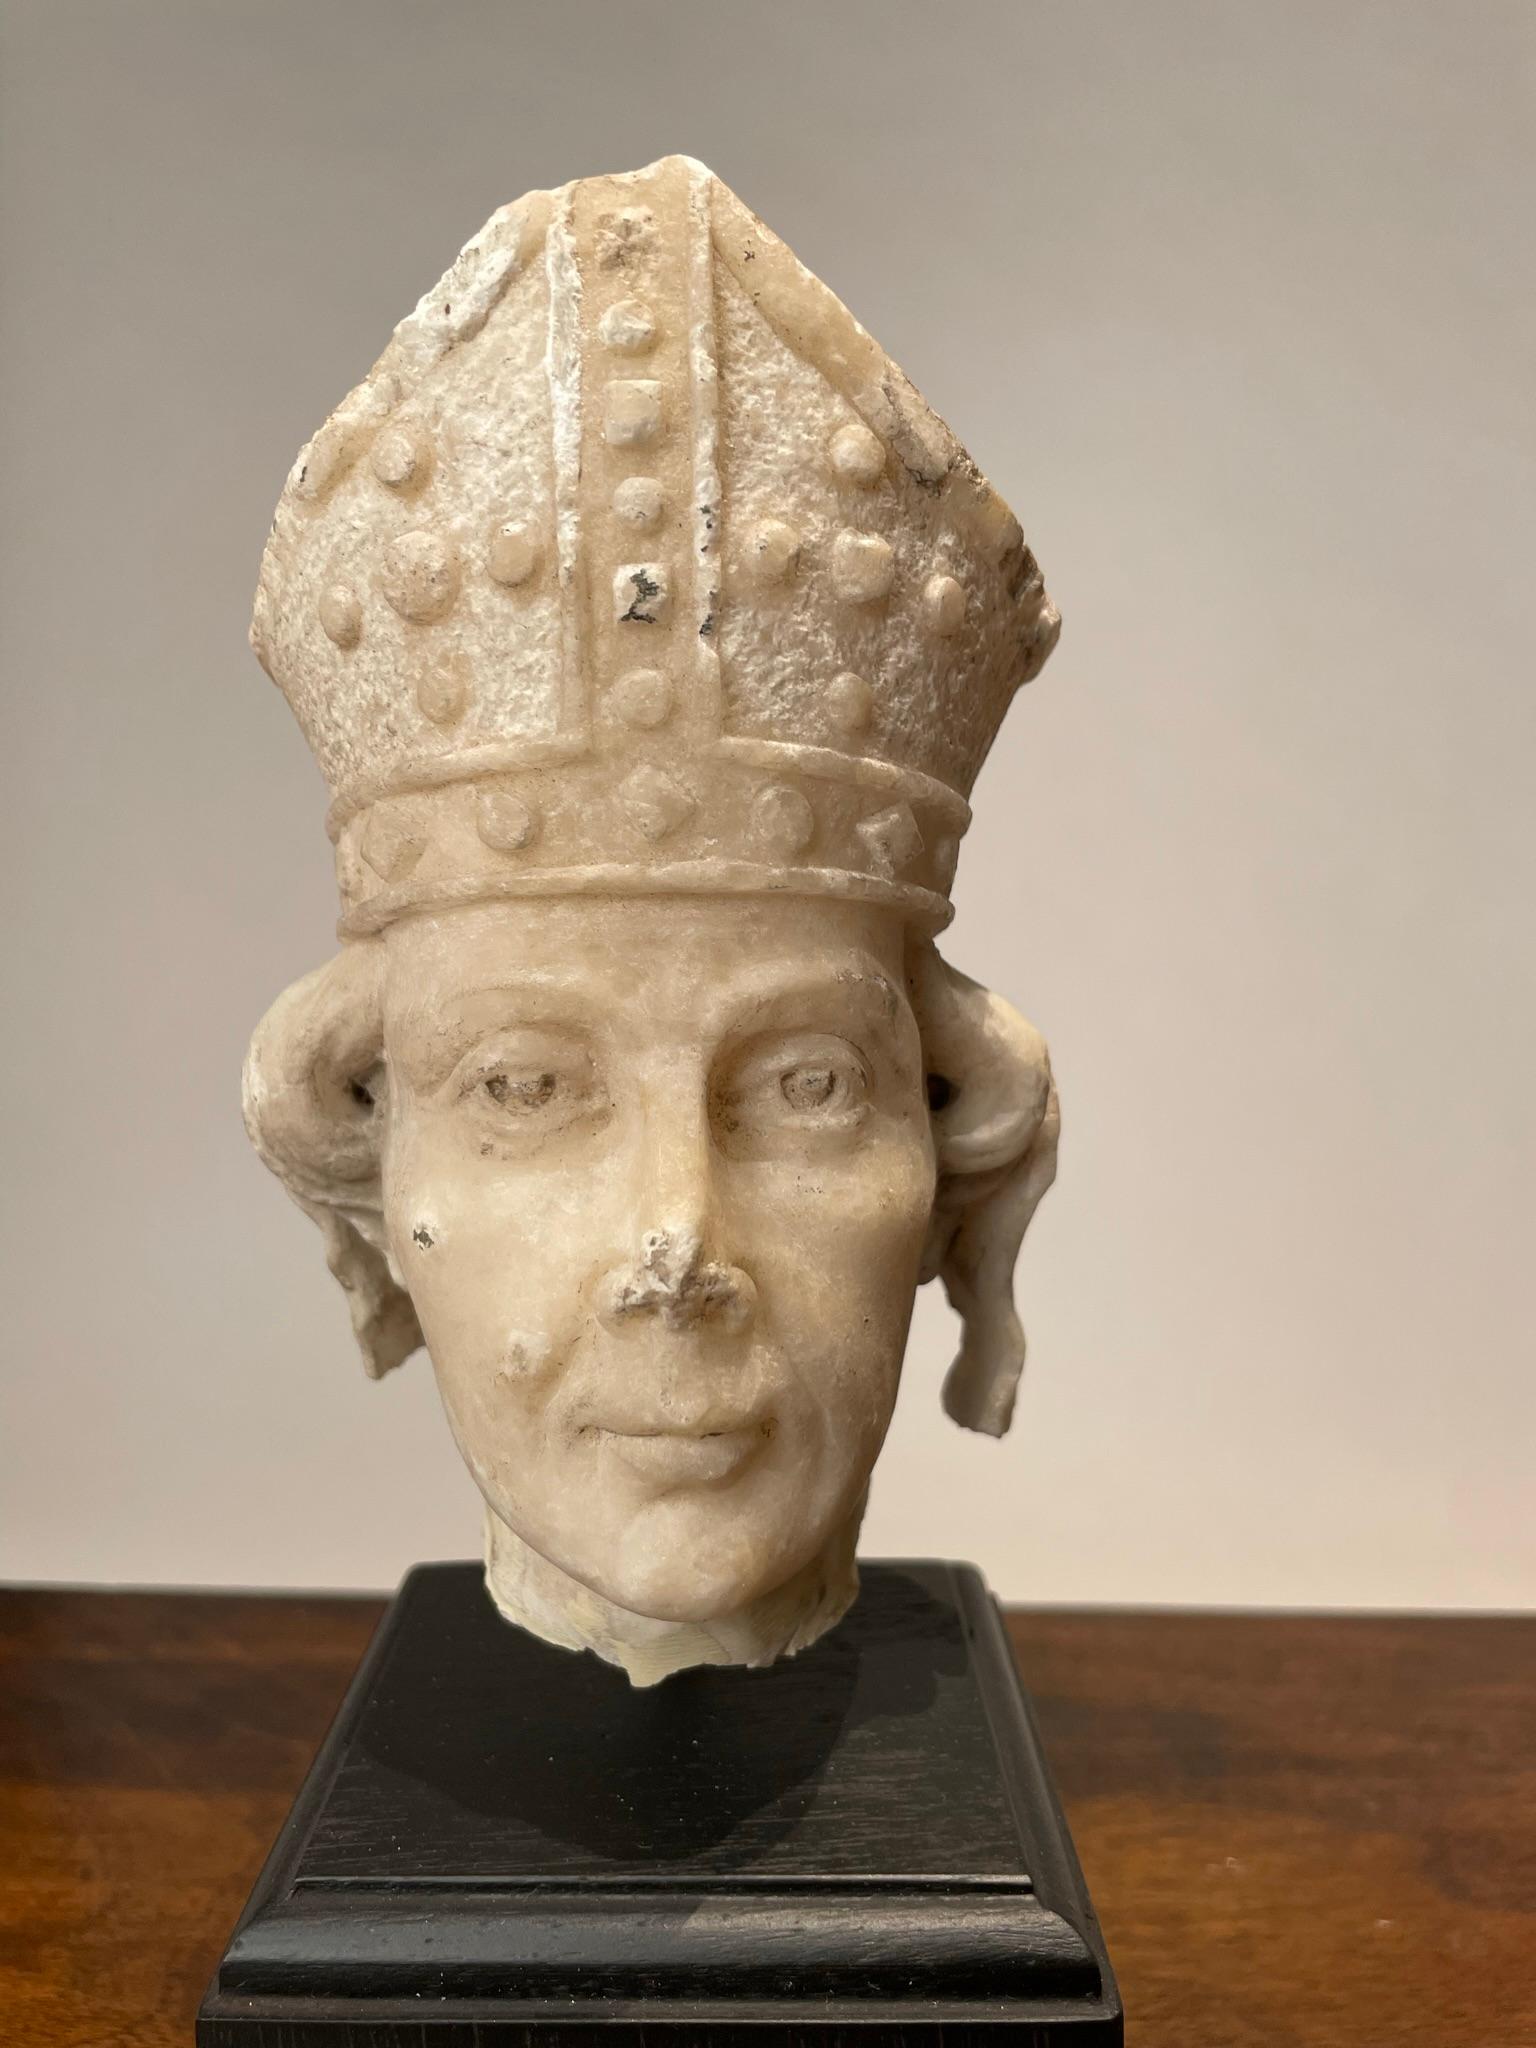 19th century Italian carved alabaster head of a saint wearing a bishop's mitre in the Gothic style. Though a fragment, the intense gaze of this small carving gives it a lot of presence. Rendered by a master carver, this piece has a lot of